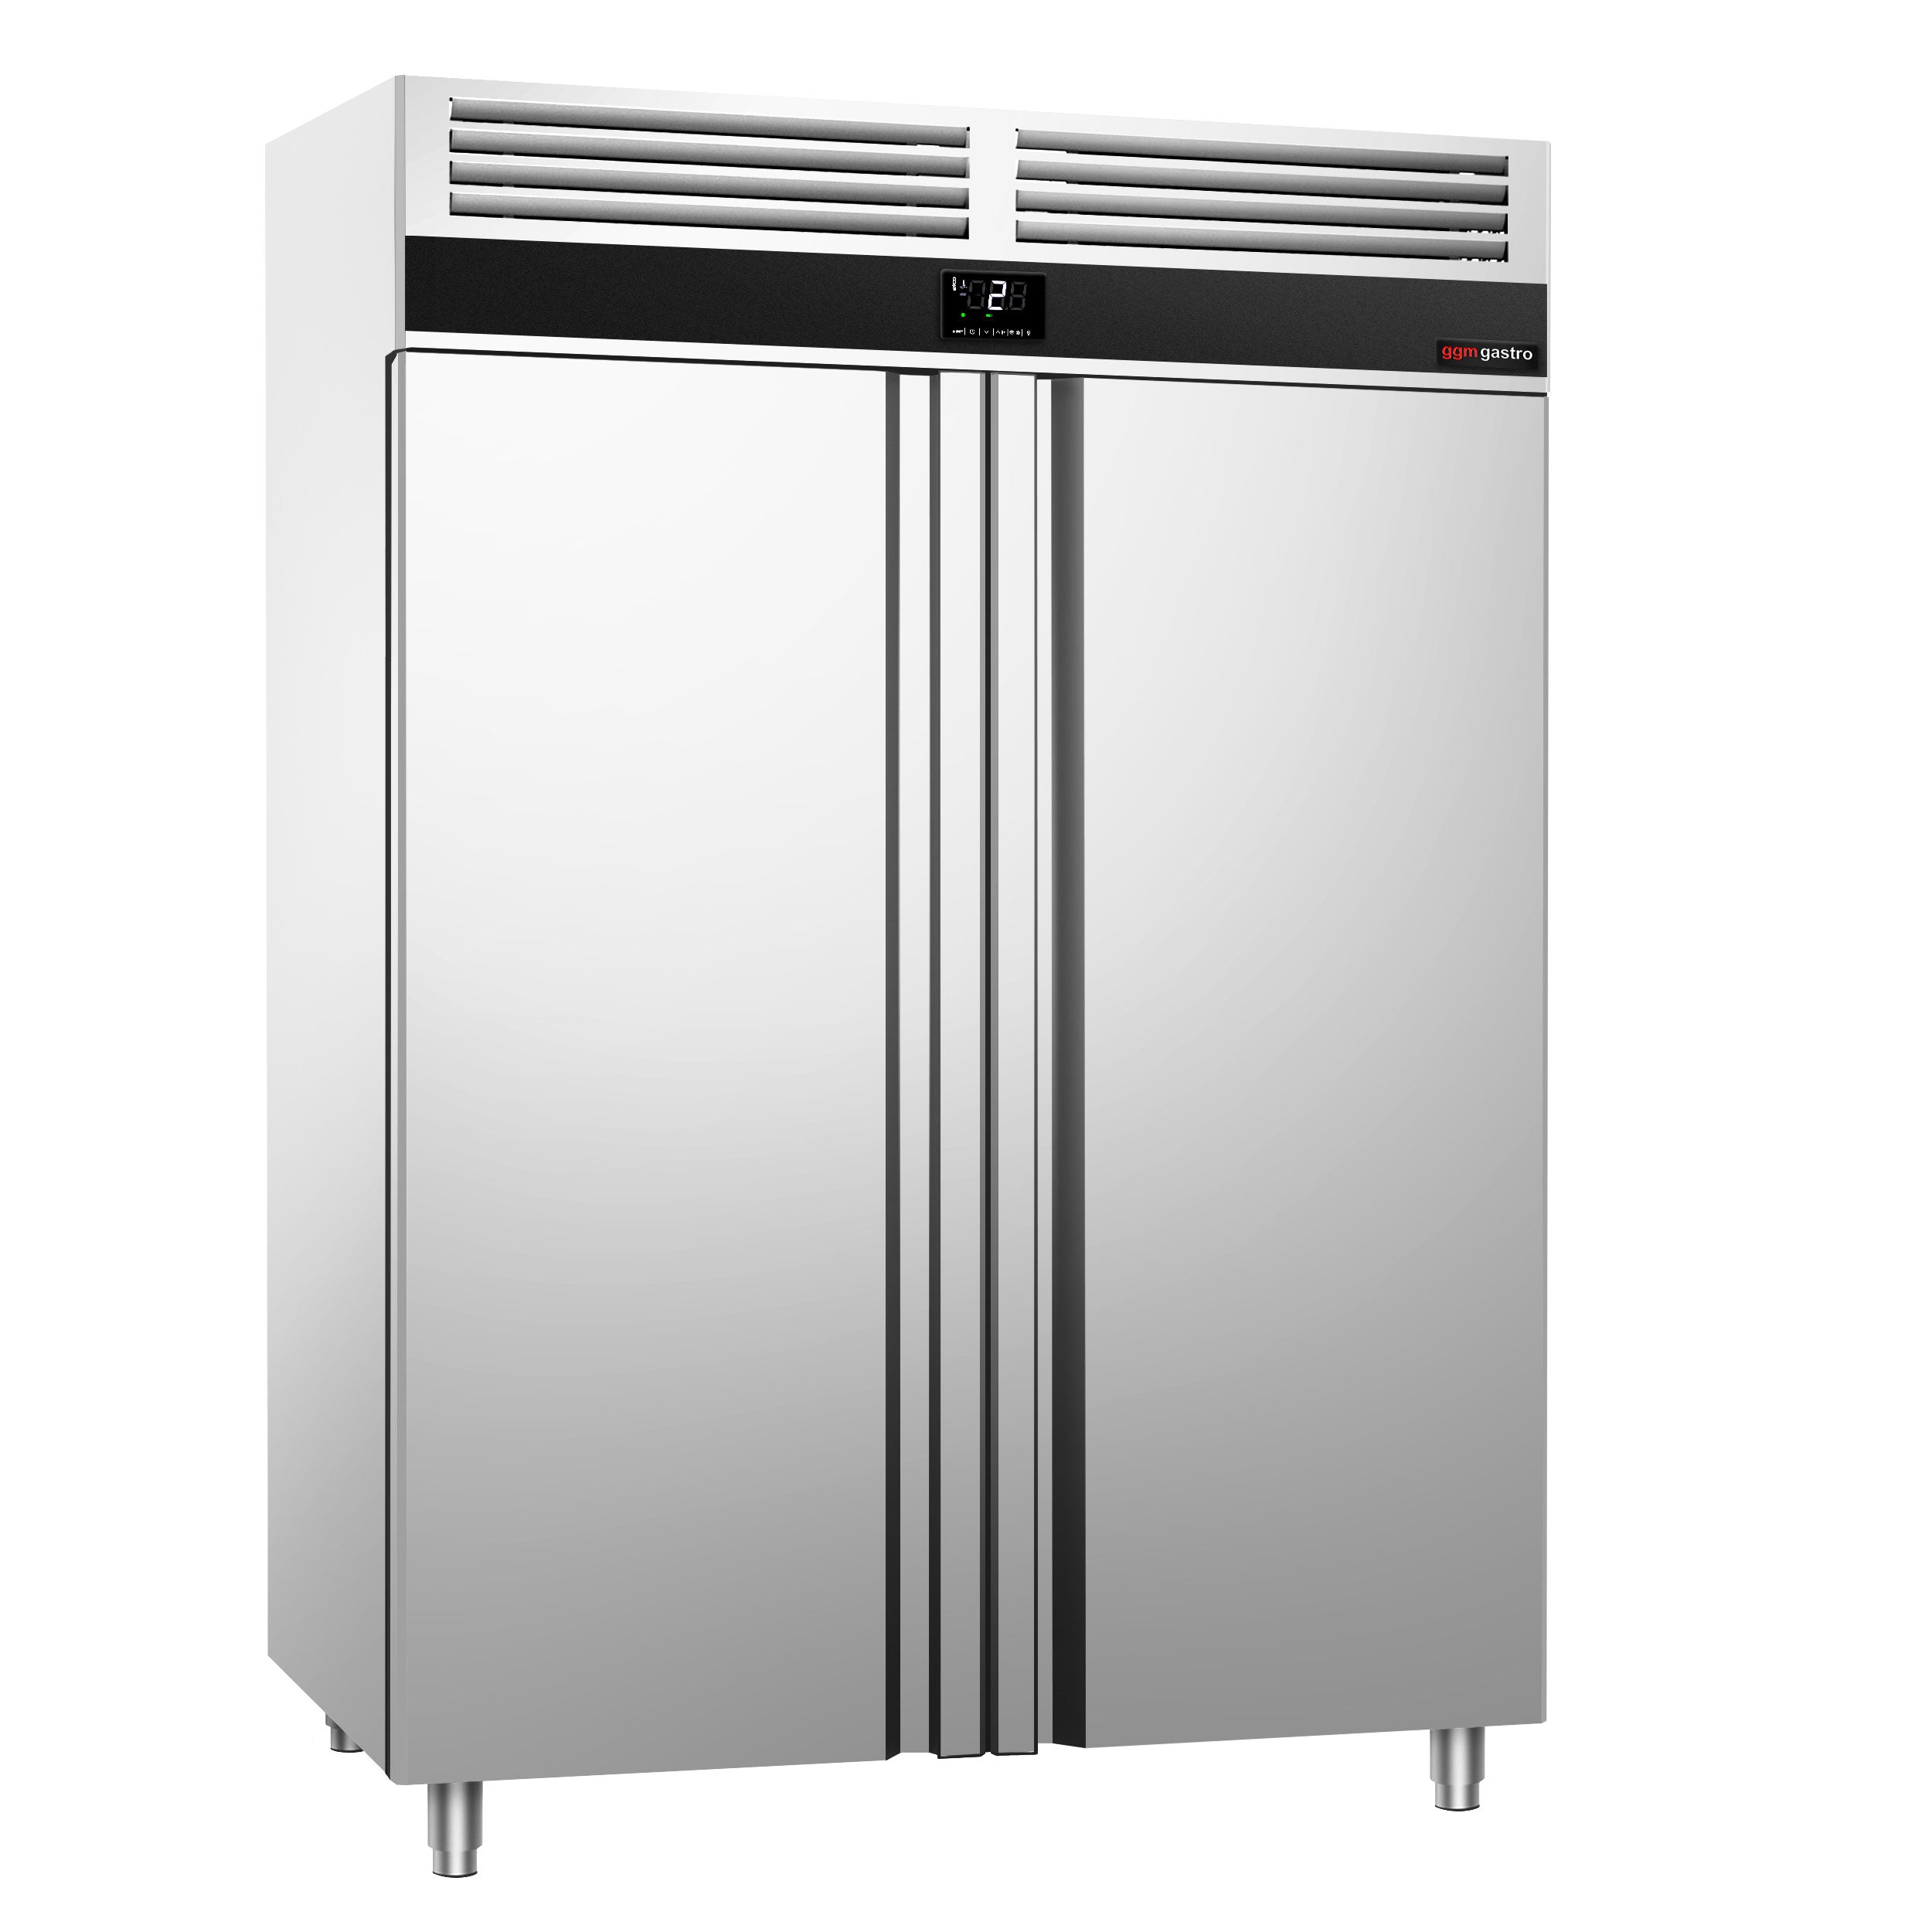 Refrigerator - 1.41 x 0.82 m - 1400 liters - with 2 stainless steel doors